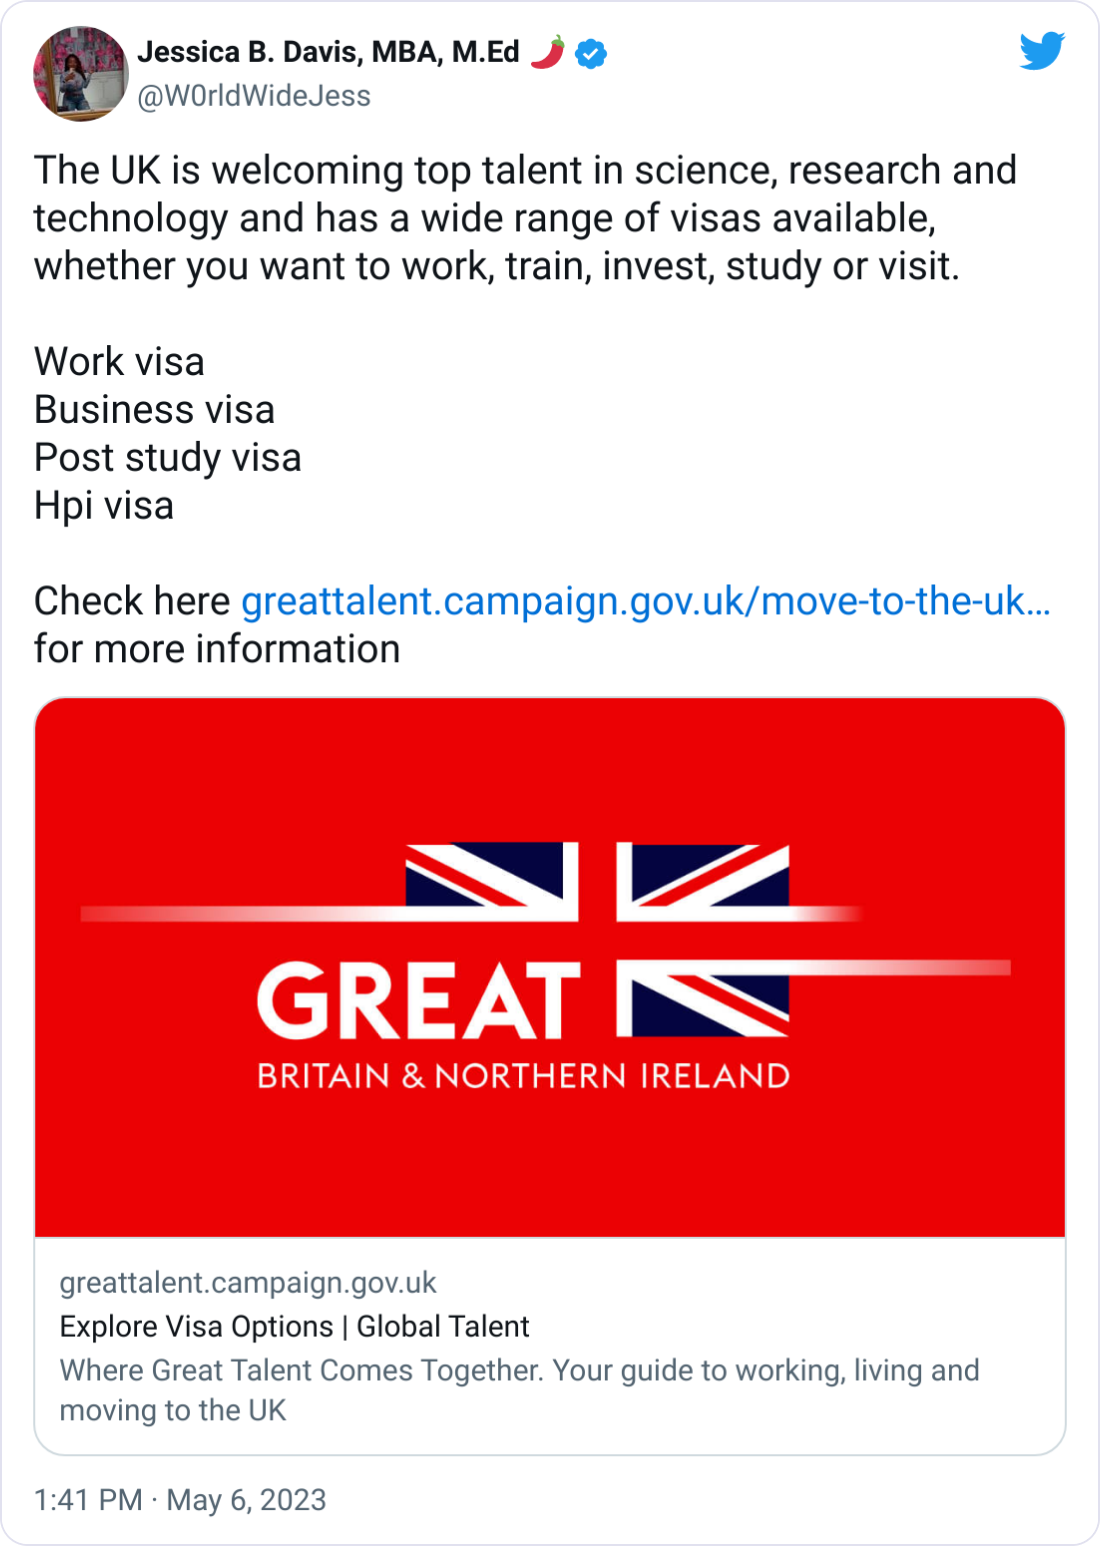 Jessica B. Davis, MBA, M.Ed 🌶 @W0rldWideJess The UK is welcoming top talent in science, research and technology and has a wide range of visas available, whether you want to work, train, invest, study or visit.  Work visa  Business visa  Post study visa  Hpi visa   Check here https://greattalent.campaign.gov.uk/move-to-the-uk/explore-visa-options/ for more information